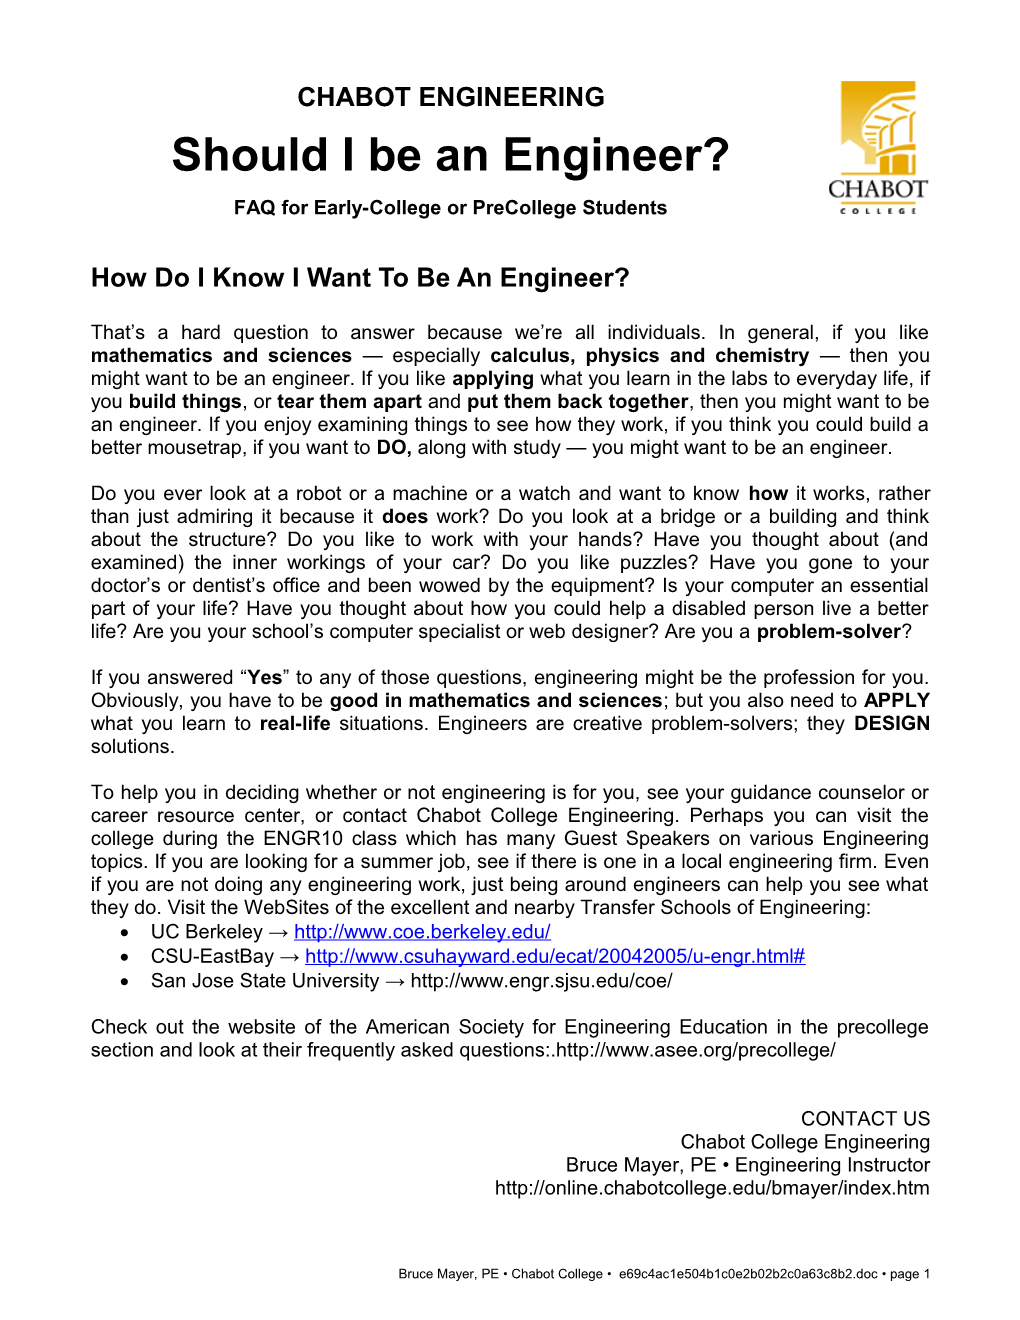 How Do I Know I Want to Be an Engineer?